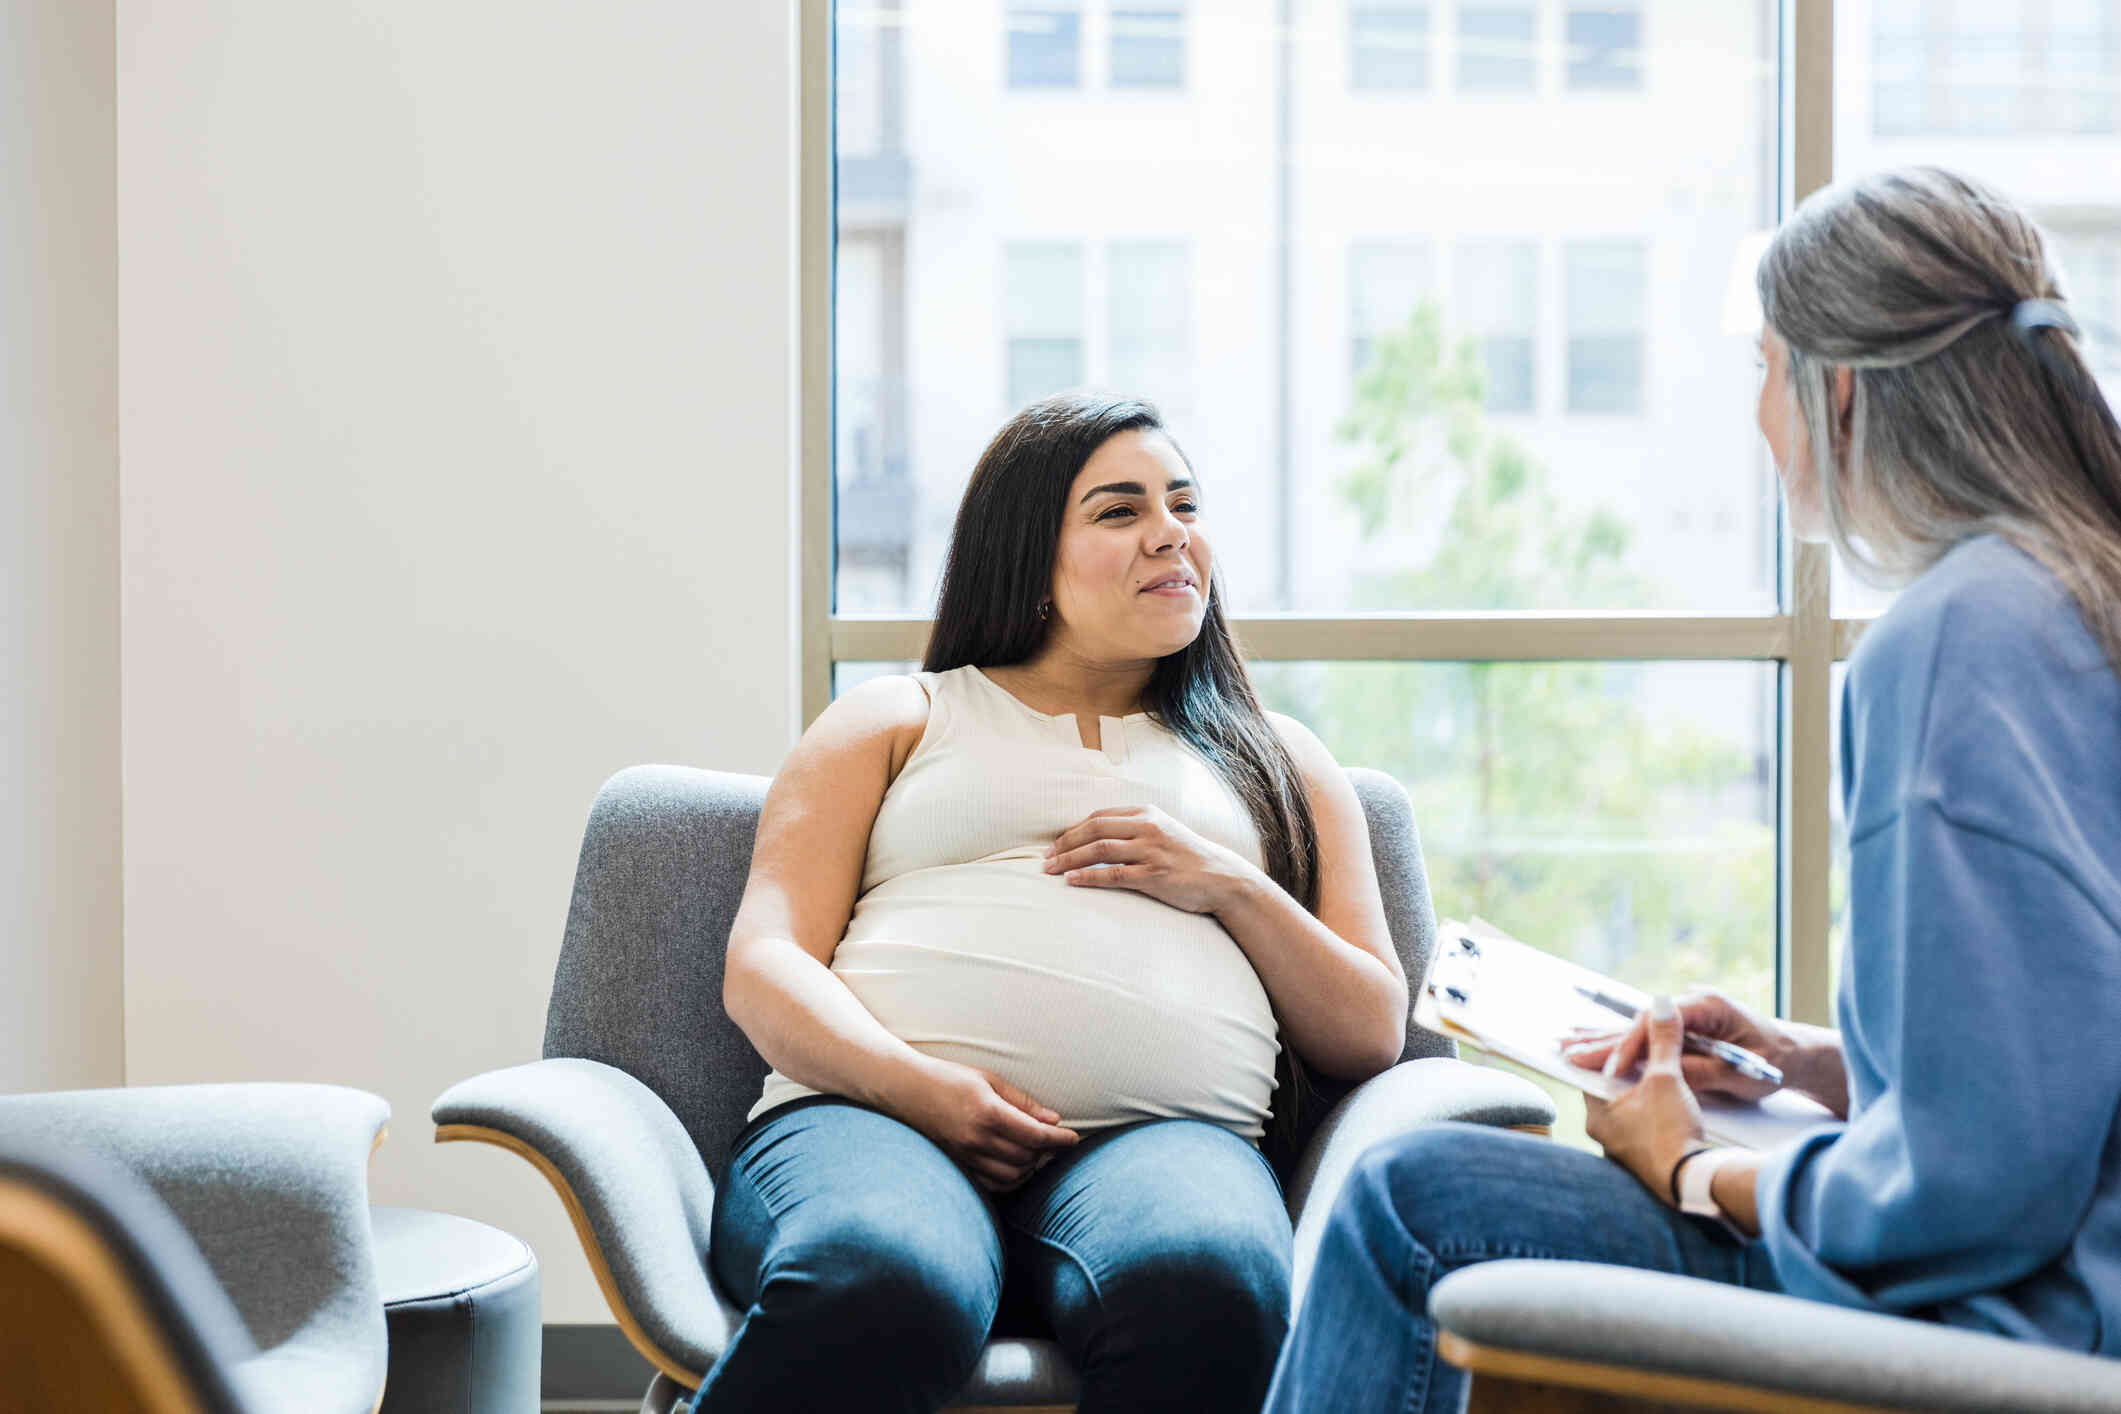 A pregnant woman sits in an armchair  and smiles at the female therapist who sits across from her.